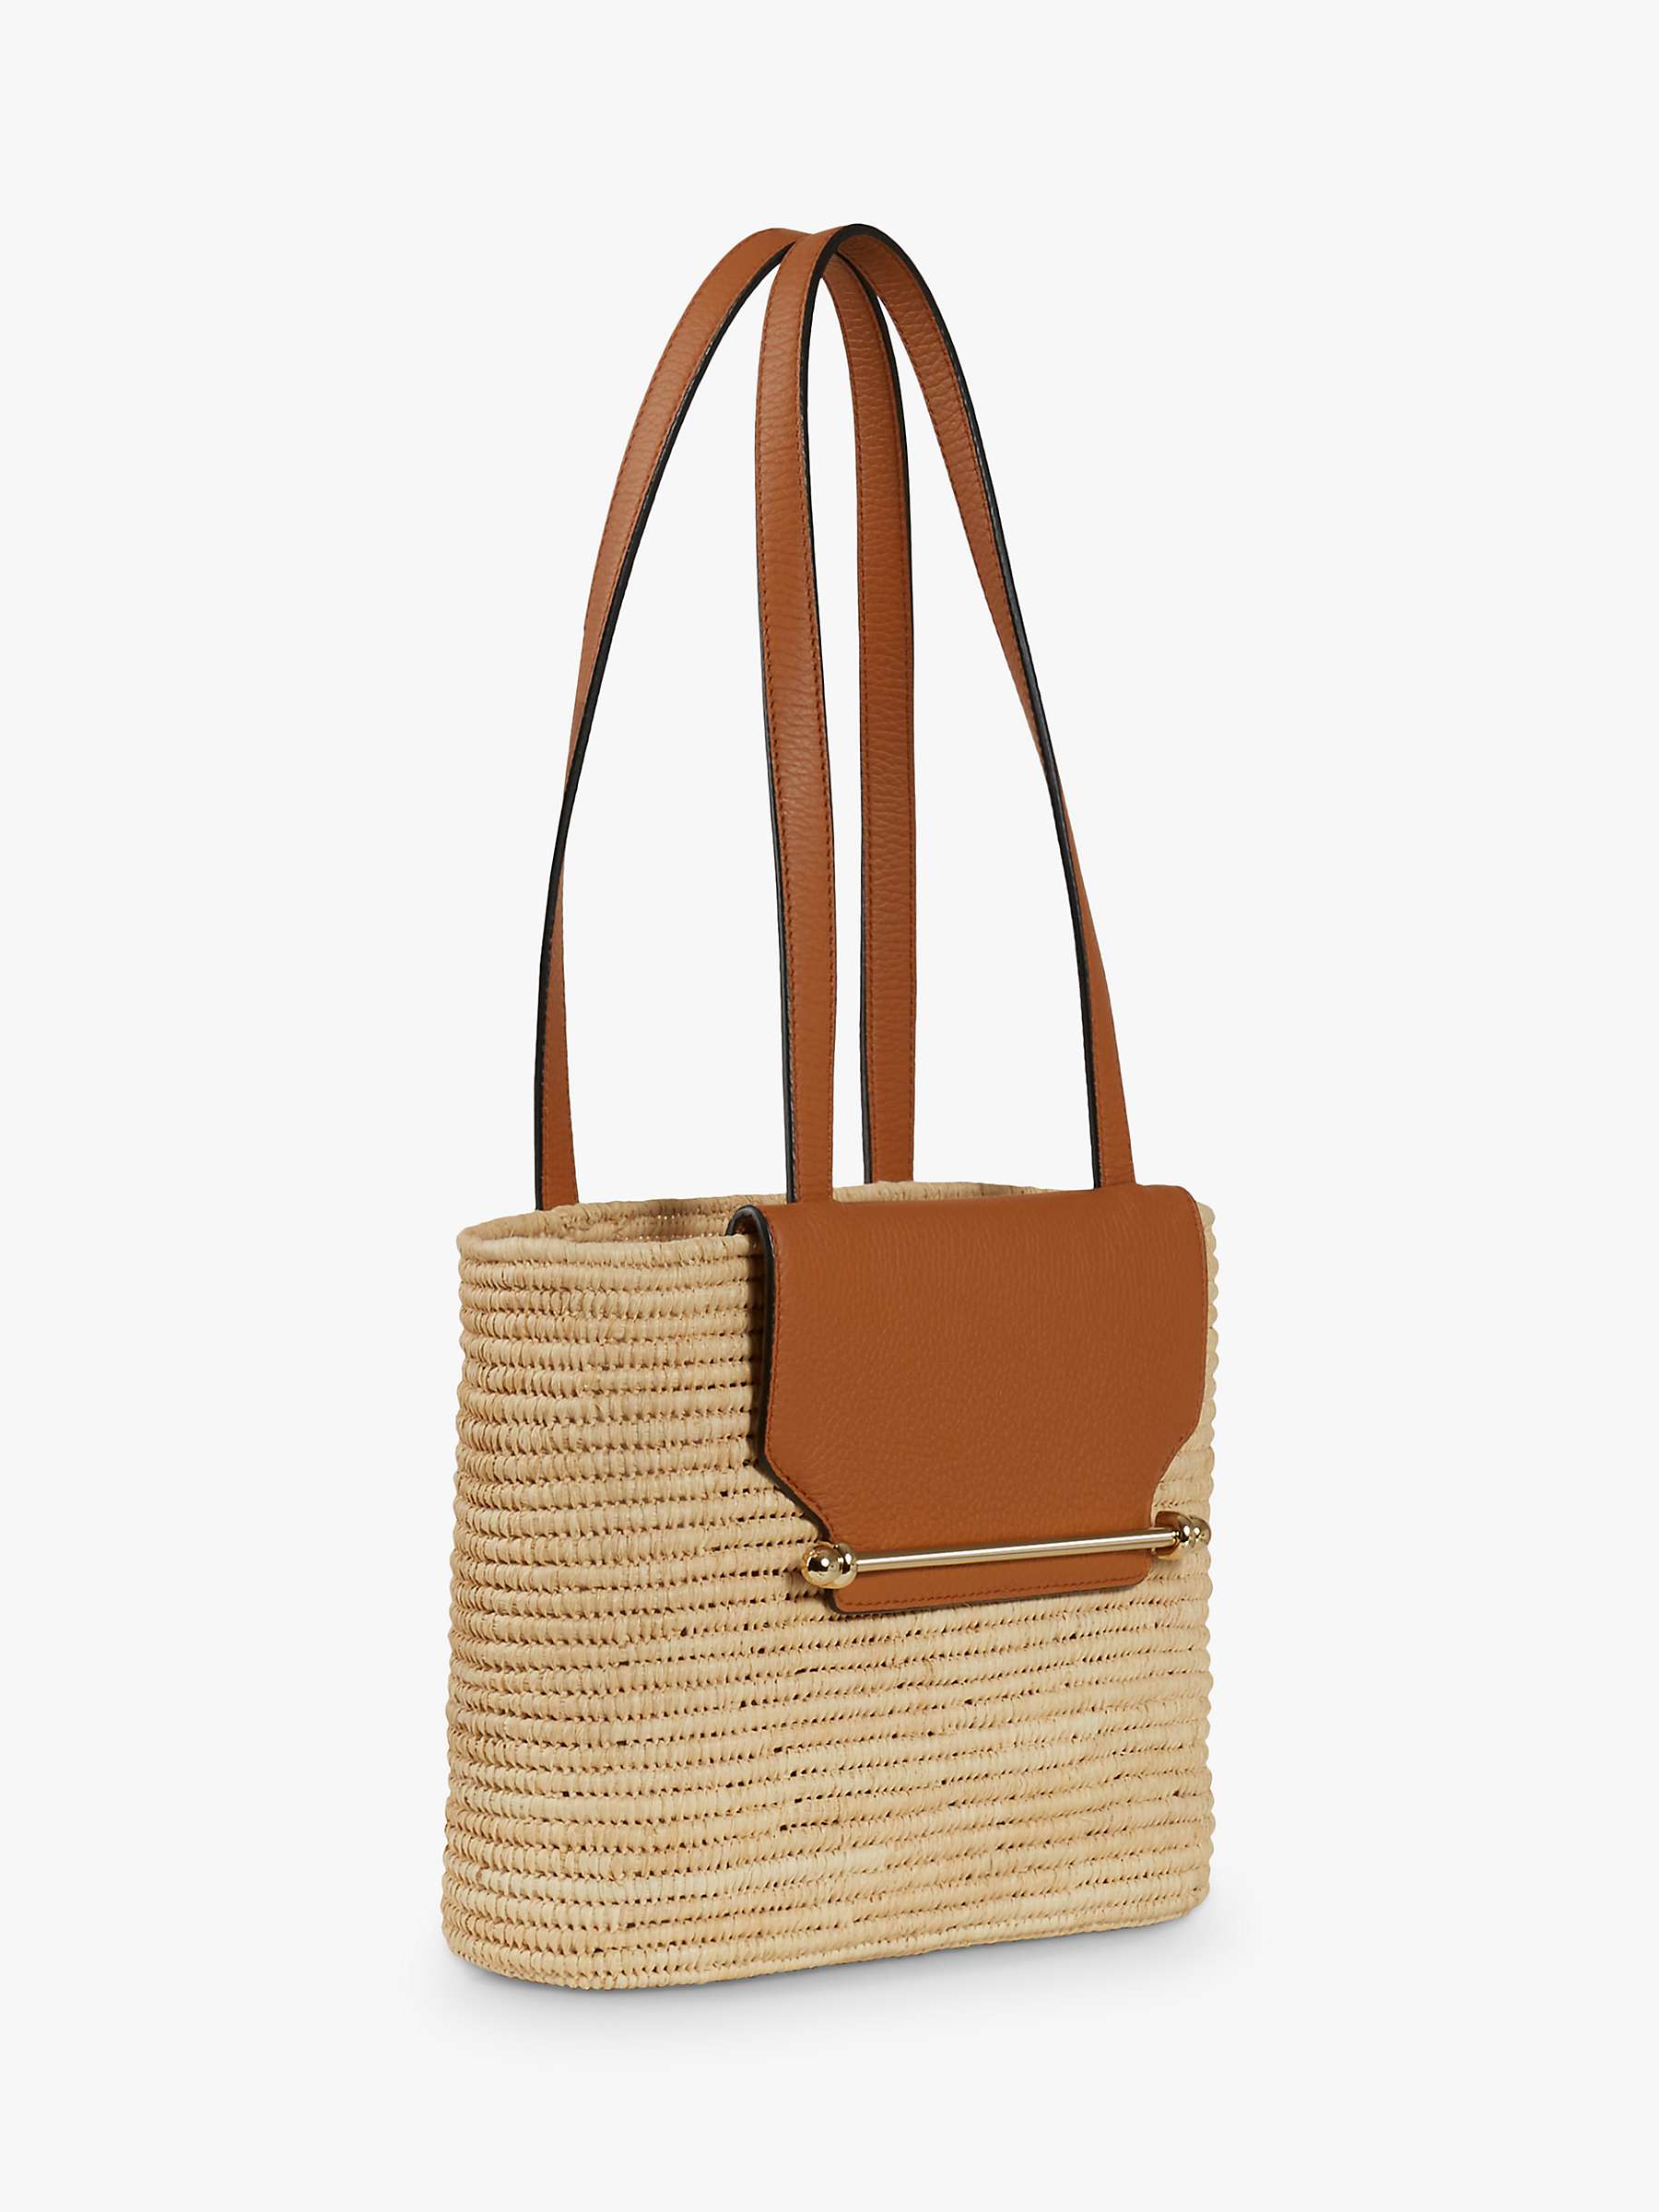 Buy Strathberry The Strathberry Basket Bag, Natural/Tan Online at johnlewis.com